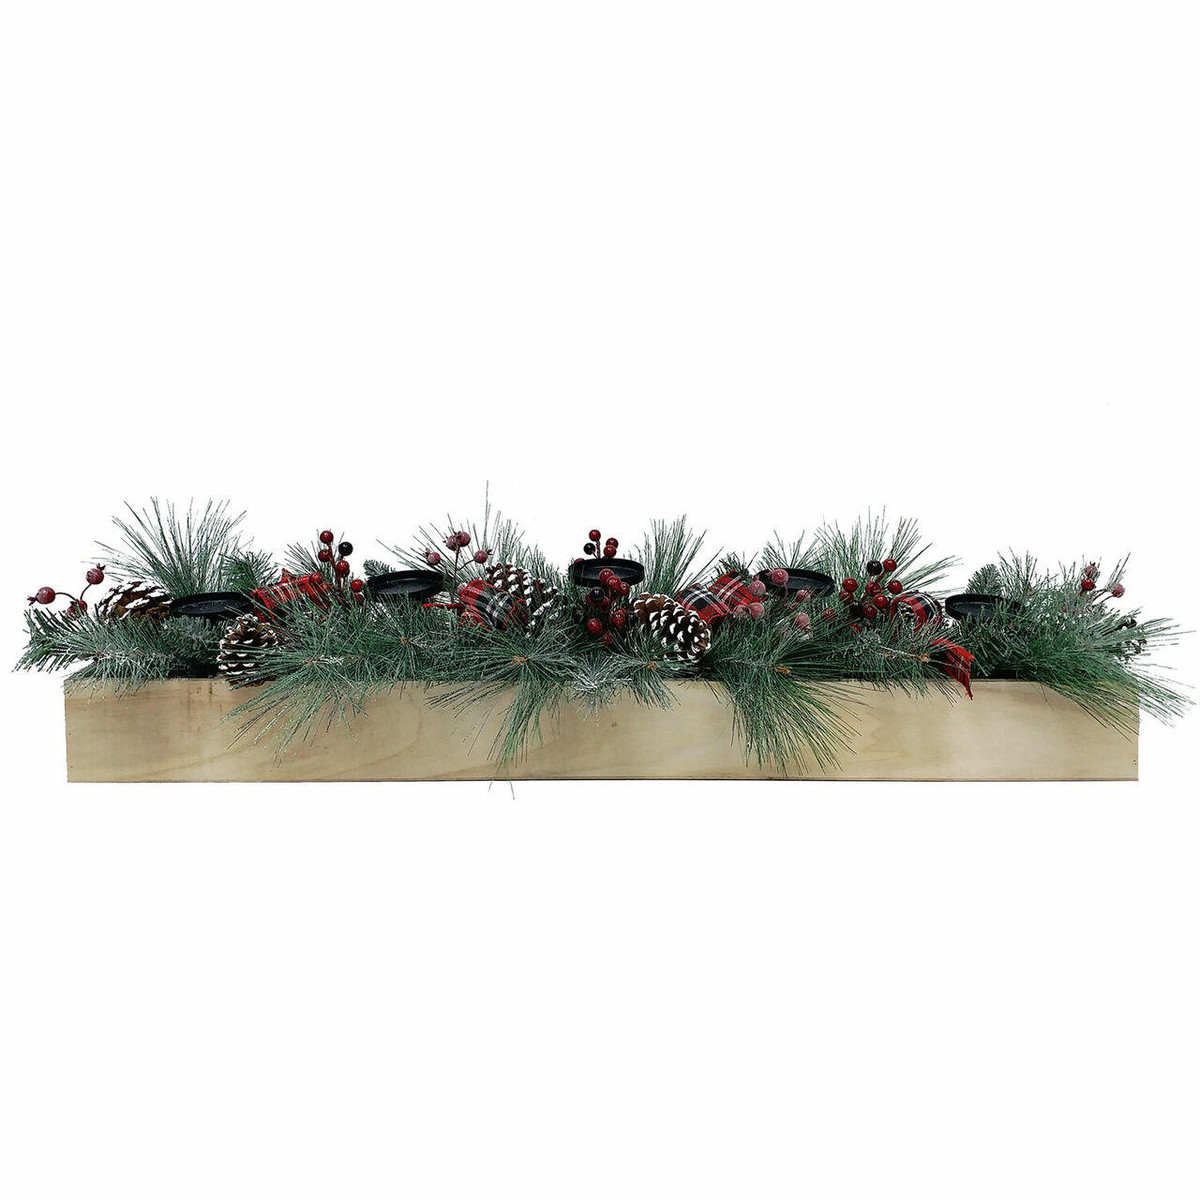 https://cdn11.bigcommerce.com/s-2tgc1eknzf/images/stencil/1200x1200/products/1617/13664/fraser-hill-farm-fraser-hill-farm-42-inch-5-candle-holder-centerpiece-with-frosted-pine-branches-red-berries-plaid-bows-and-pinecones-in-wooden-box-ff042chtt010-0rd__94593.1635524783.jpg?c=1